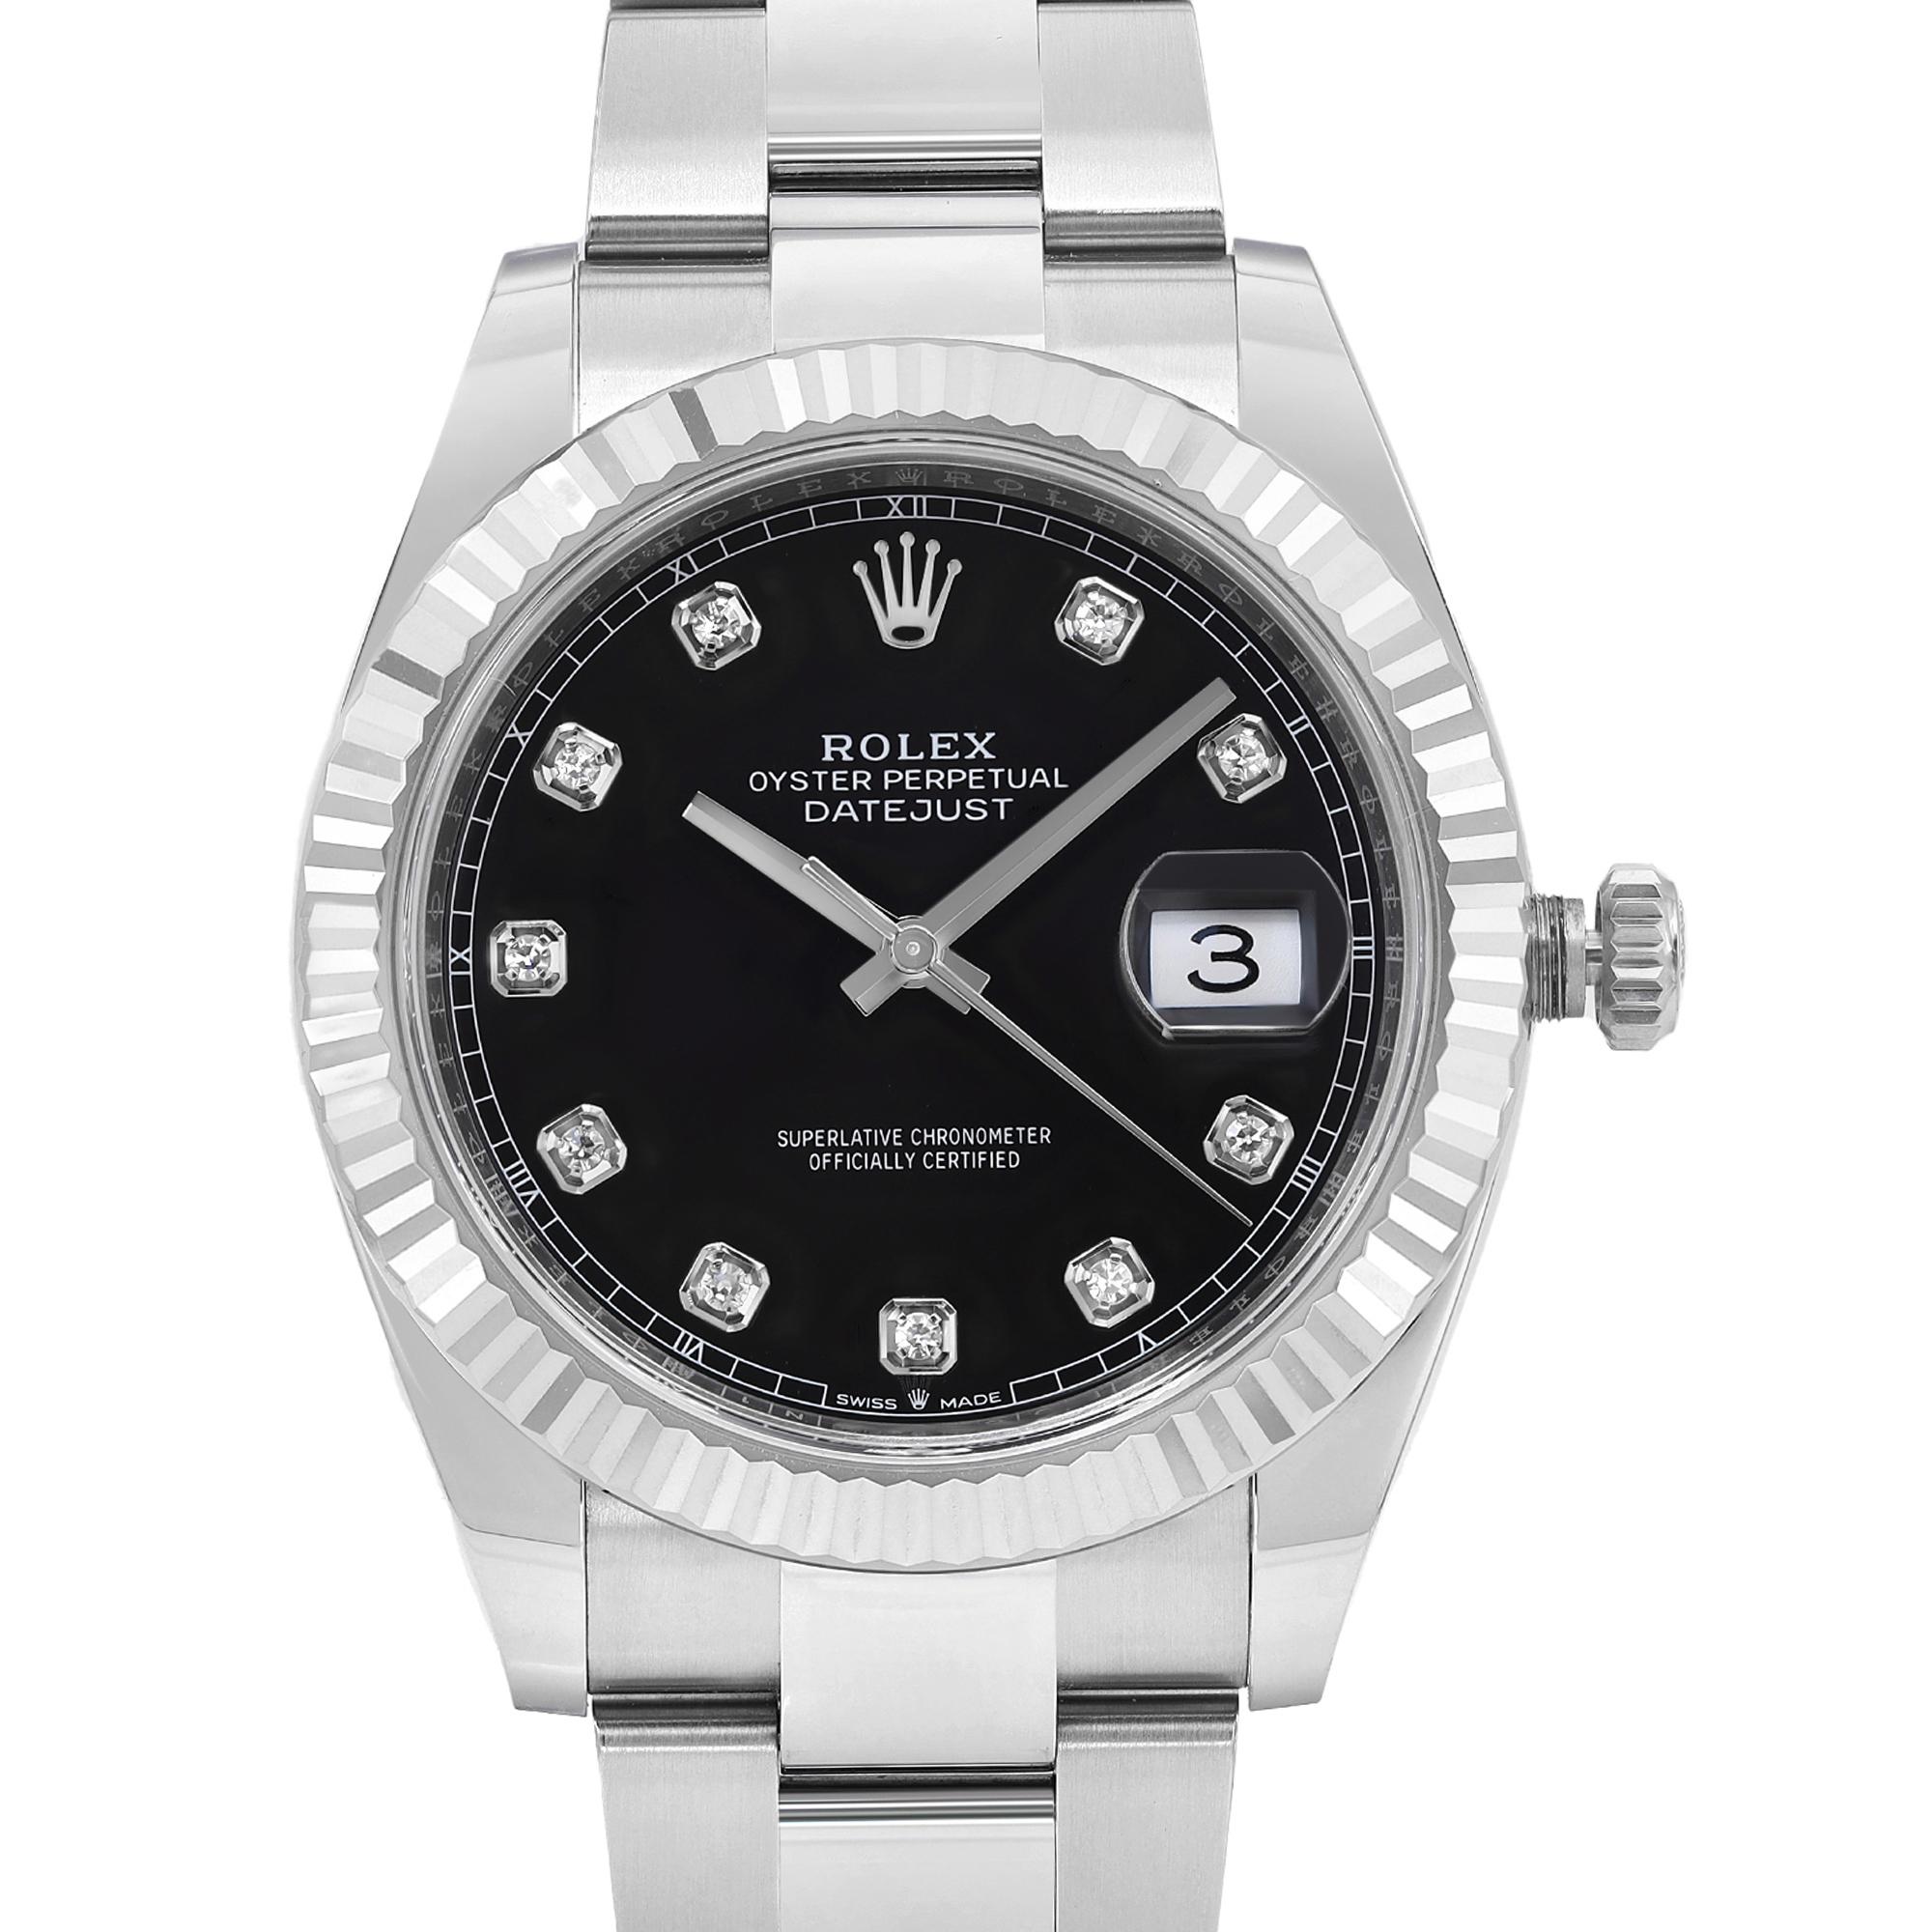 Pre-owned. Original box and papers are included. Covered by a 3-year Chronostore Warranty.

General Information
Brand: Rolex
Model: Datejust 126334
Department: Men
Style: Luxury
Vintage: No
Country/Region of Manufacture: Switzerland
Movement
Type: